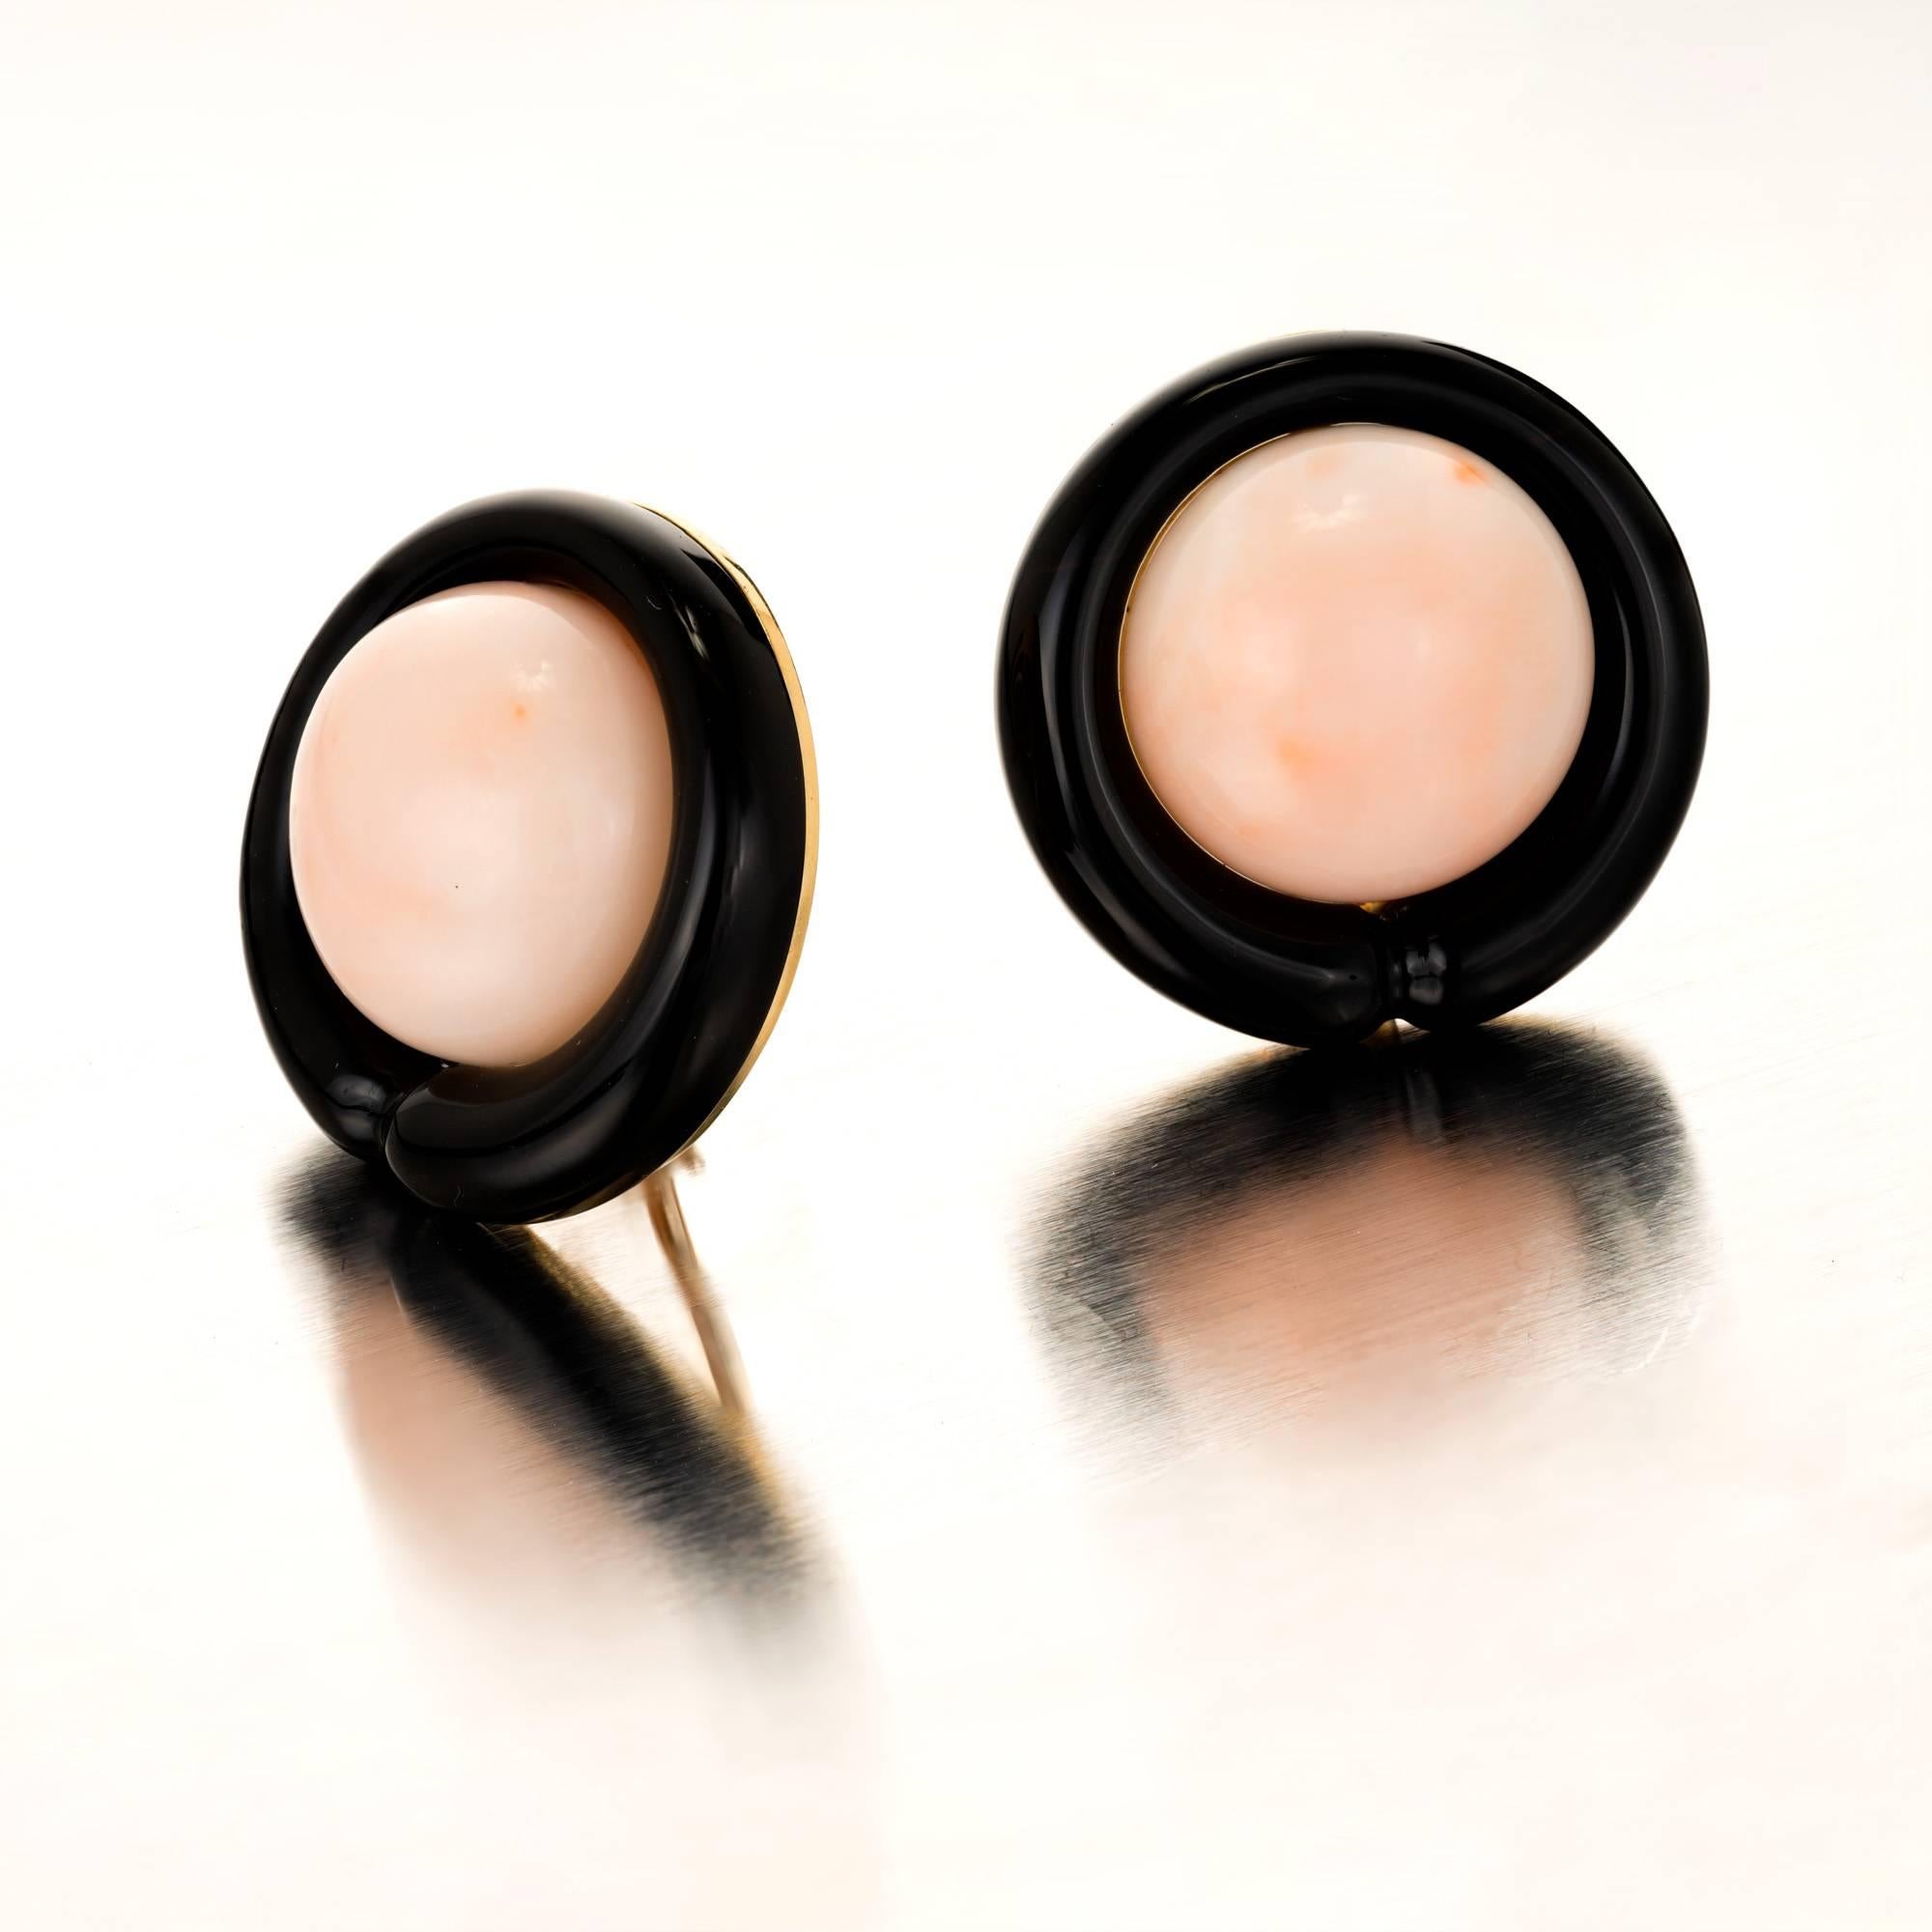 1950s Cellino 18k mid-century angel skin untreated Coral and black Onyx clip post earrings.

2 17mm round genuine Angel Skin natural untreated Coral
2 custom cut black Onyx
18k Yellow gold
Stamped: 18k
Tested: 18k
Hallmark: Cellino
Top to bottom: